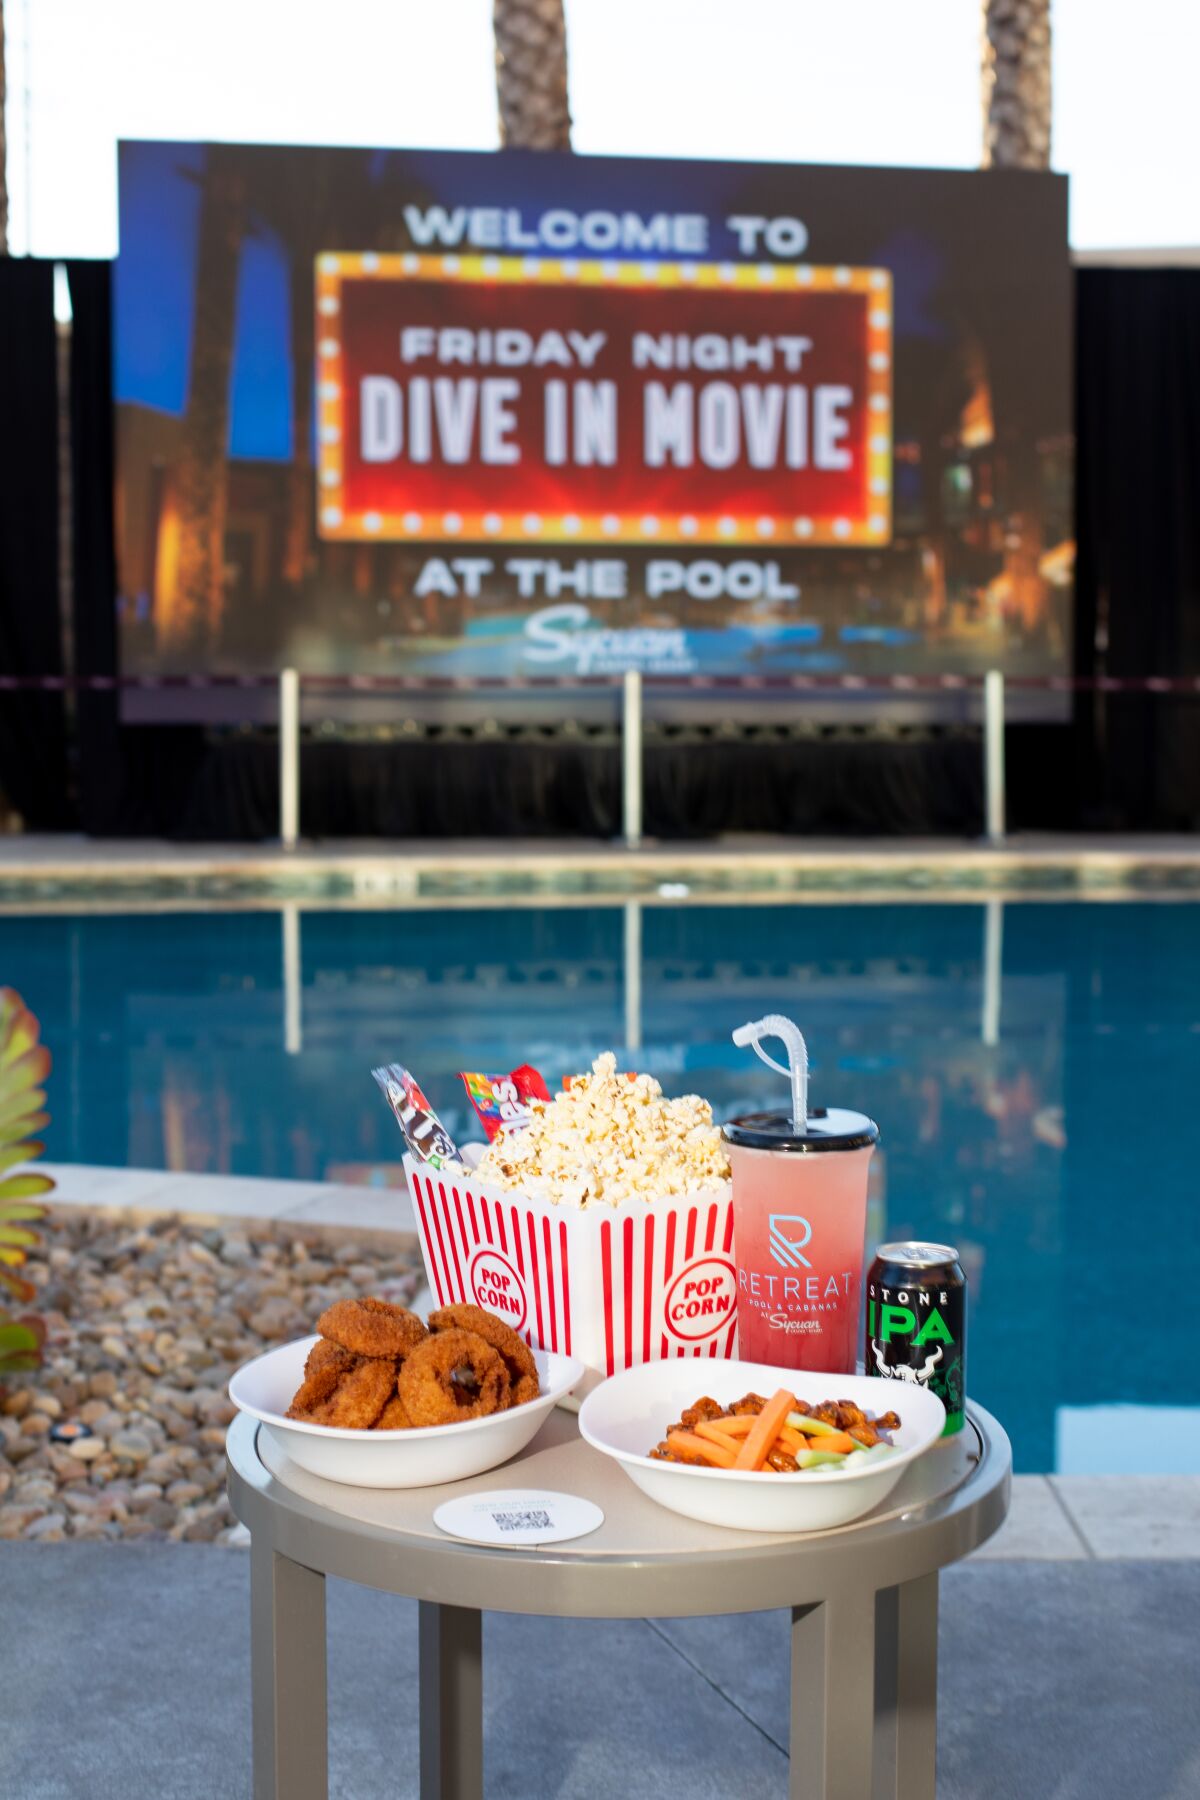 Sycuan Casino Resort's Friday night Dive-In Movie special.